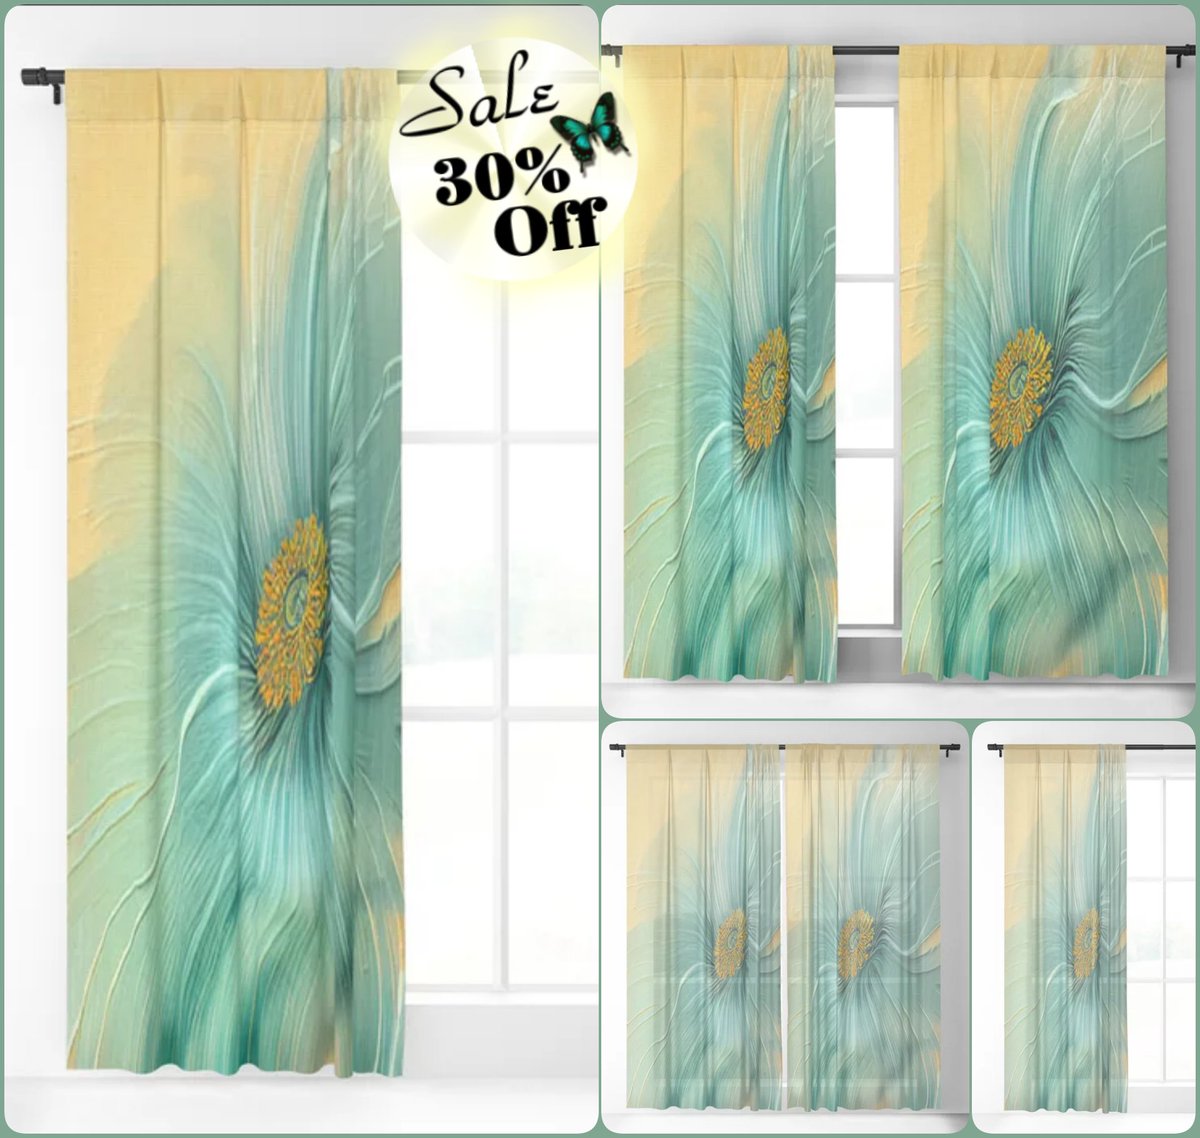 *SALE 30% Off*
Discovering Quiet Blackout & Sheer Curtain~by Art Falaxy~
~Exquisite Decor~
#artfalaxy #art #curtains #drapes #homedecor #society6 #Society6max #swirls #accents #sheercurtains #blackoutcurtains #floorrugs

society6.com/product/discov…

society6.com/product/discov…